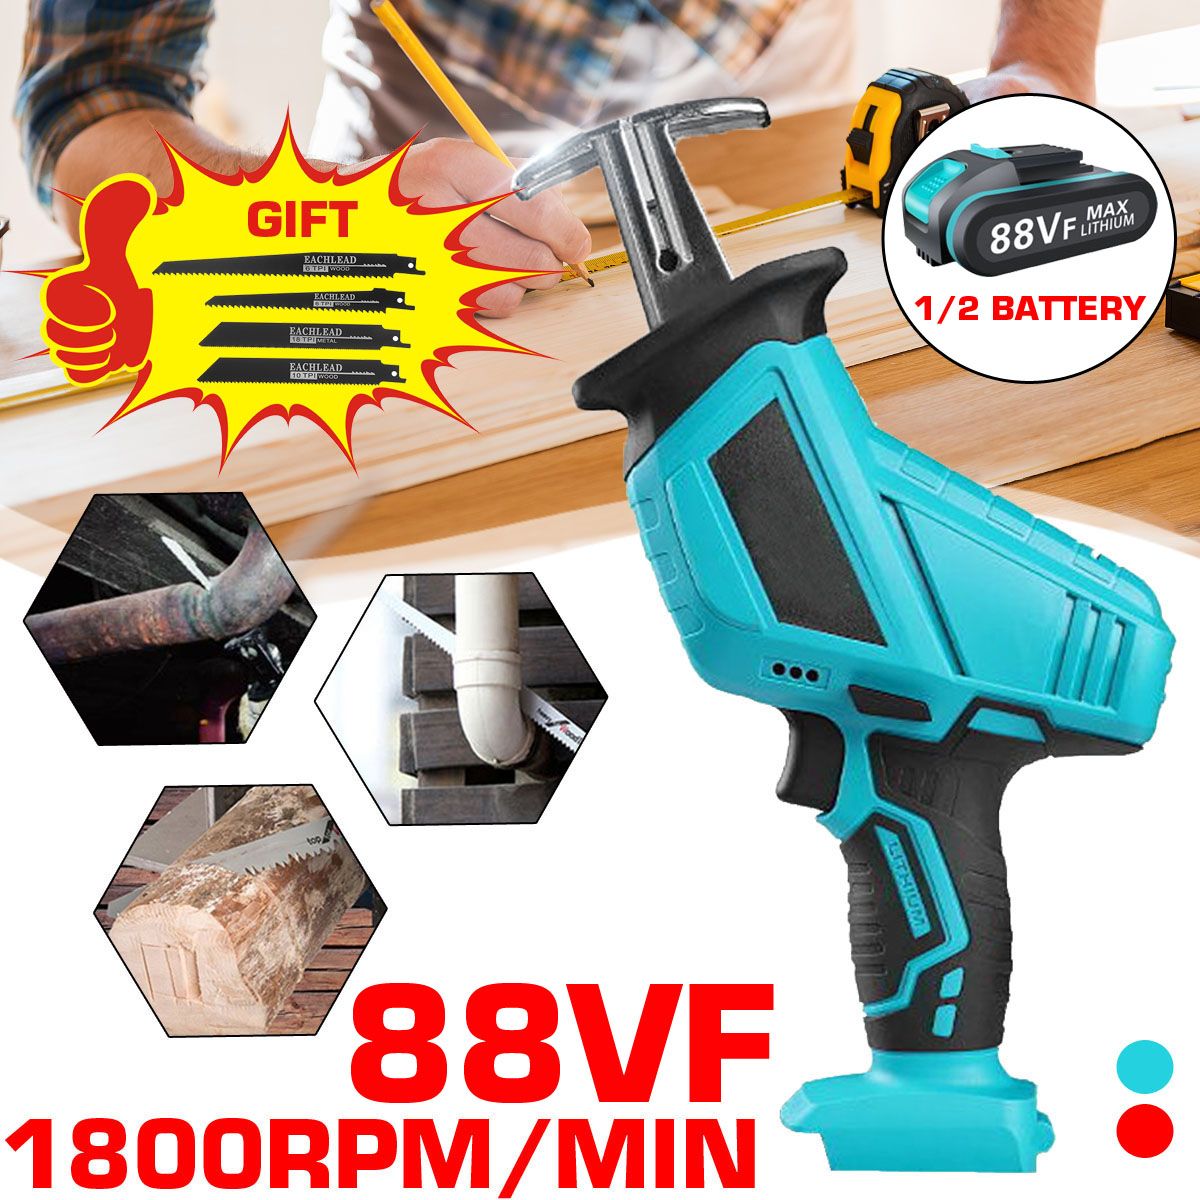 21V-Coedless-Handheld-Electric-Reciprocating-Saw-Variable-Speed-Electric-Saw-with-4xSaw-Blades-Tools-1724901